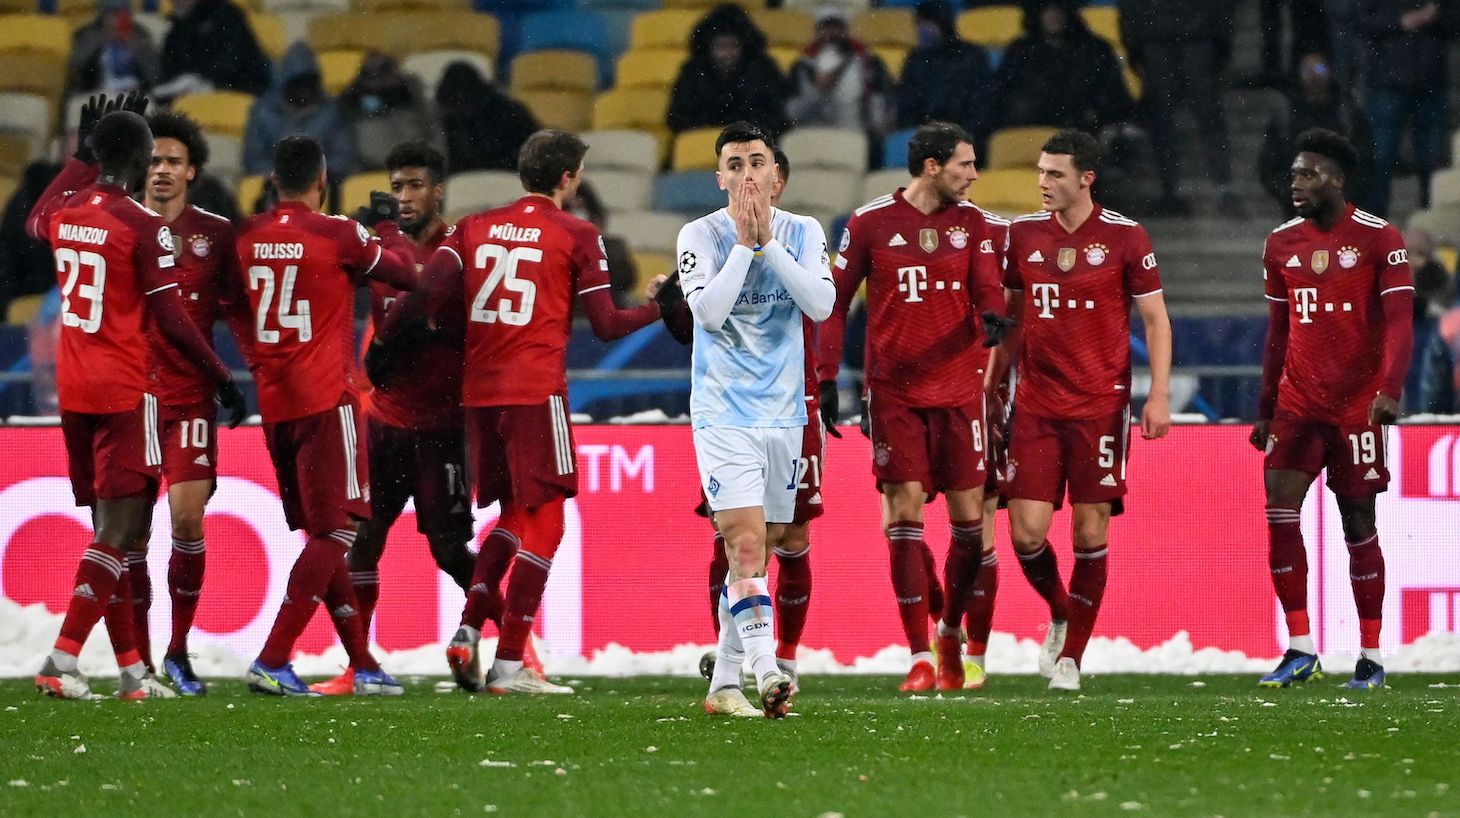 Bayern Munich's players celebrate their second goal during the UEFA Champions League football match between Dynamo Kiev and Bayern Munich at the Olympic Stadium in Kiev on November 23, 2021.